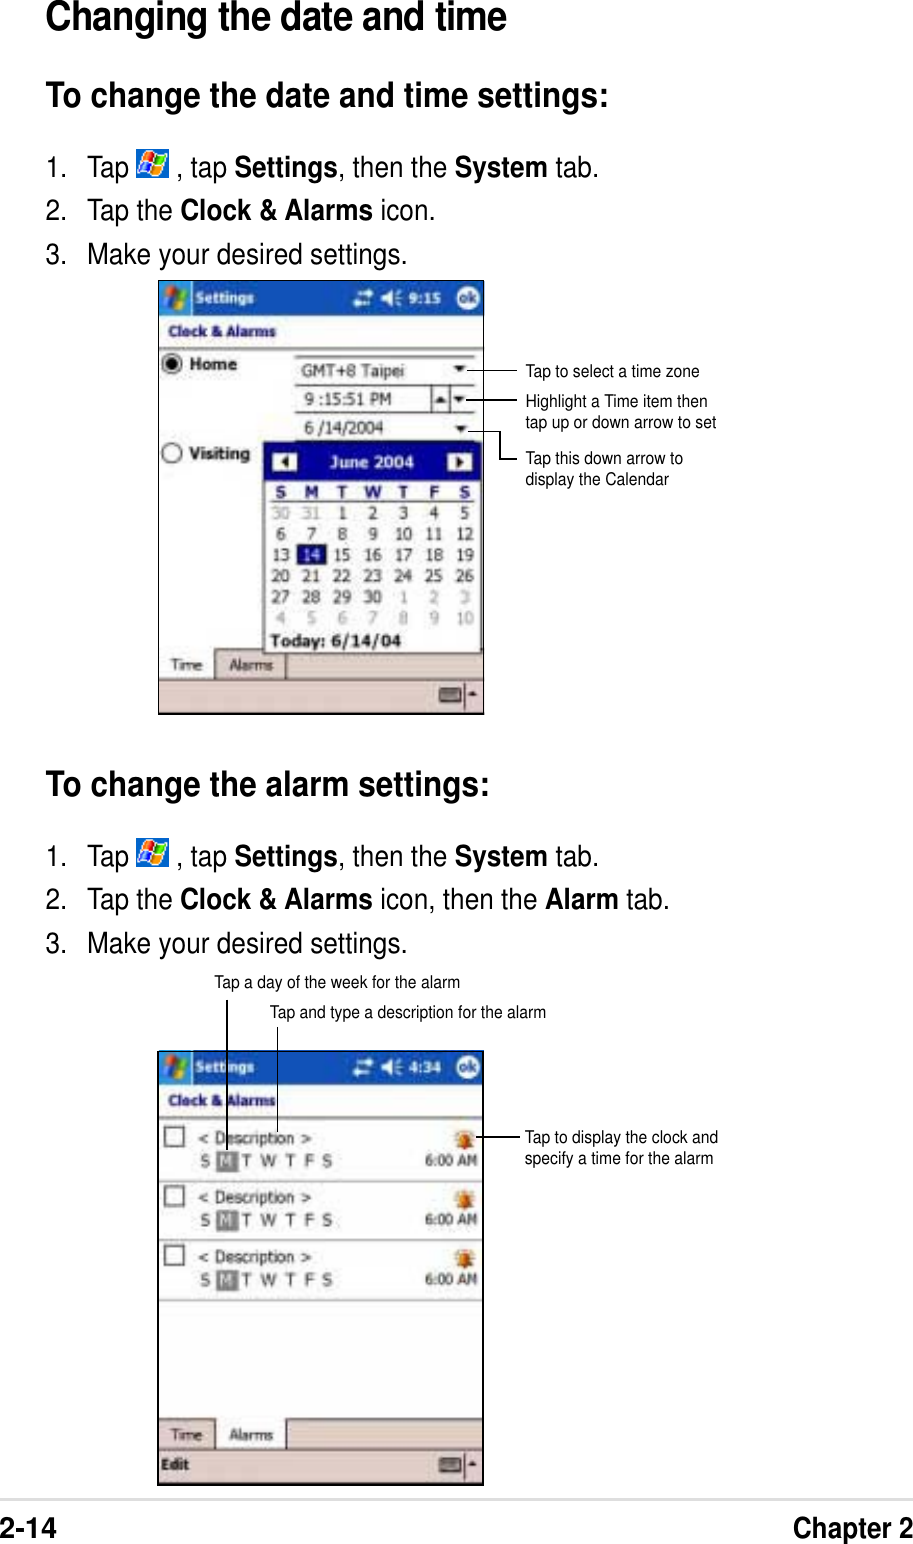 2-14Chapter 2Changing the date and timeTo change the date and time settings:1. Tap   , tap Settings, then the System tab.2. Tap the Clock &amp; Alarms icon.3. Make your desired settings.To change the alarm settings:1. Tap   , tap Settings, then the System tab.2. Tap the Clock &amp; Alarms icon, then the Alarm tab.3. Make your desired settings.Tap to select a time zoneHighlight a Time item thentap up or down arrow to setTap this down arrow todisplay the CalendarTap a day of the week for the alarmTap and type a description for the alarmTap to display the clock andspecify a time for the alarm